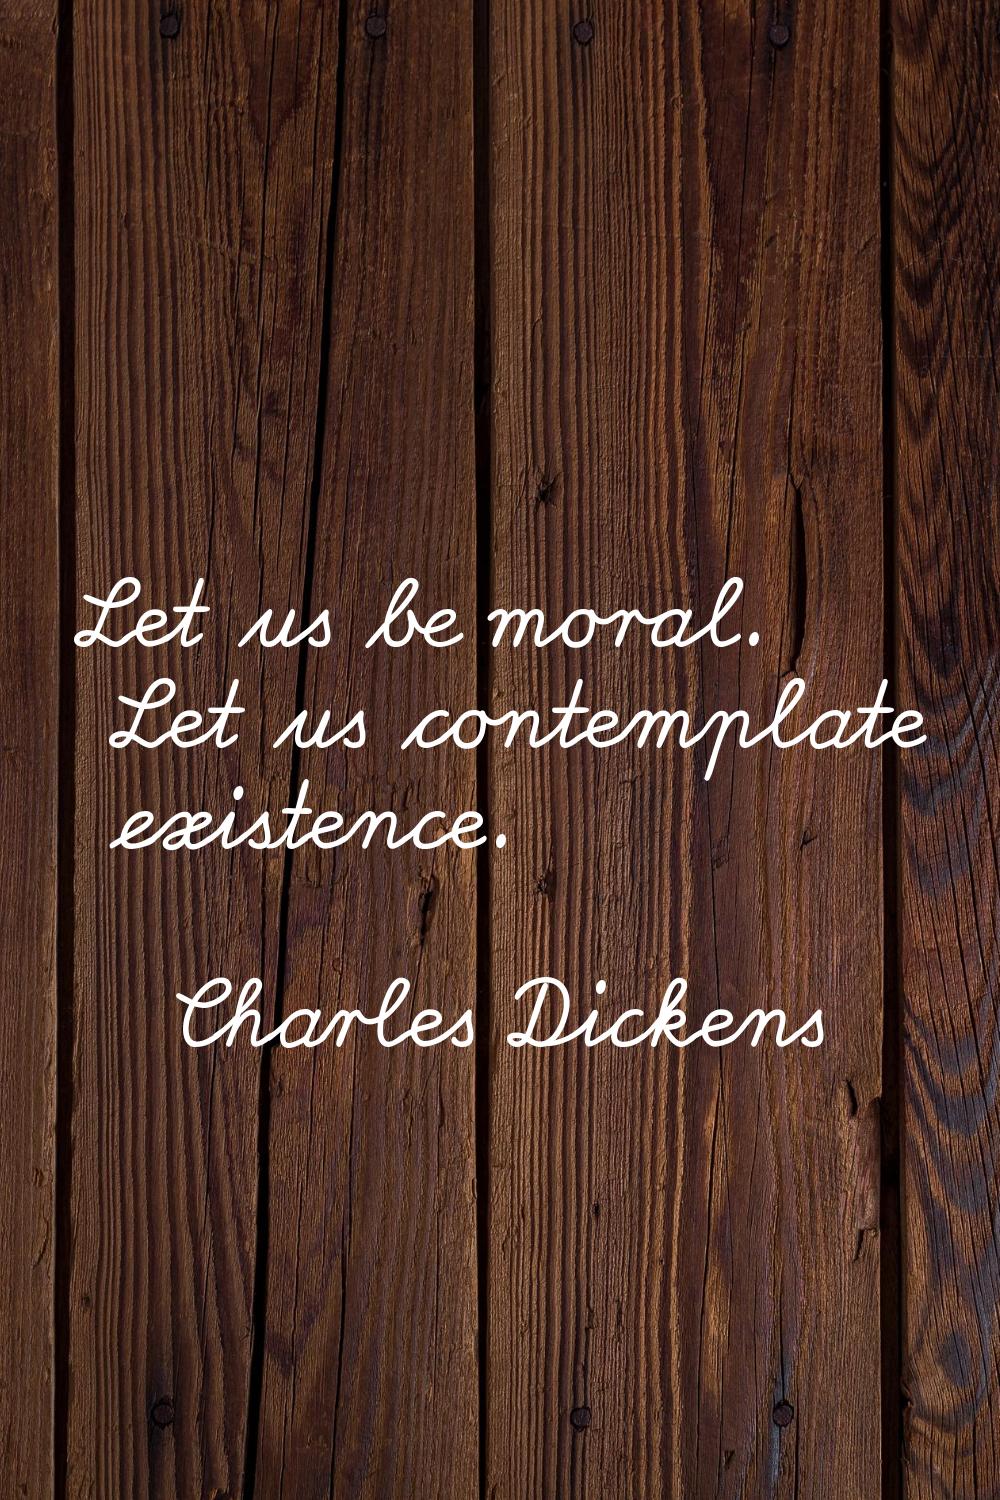 Let us be moral. Let us contemplate existence.